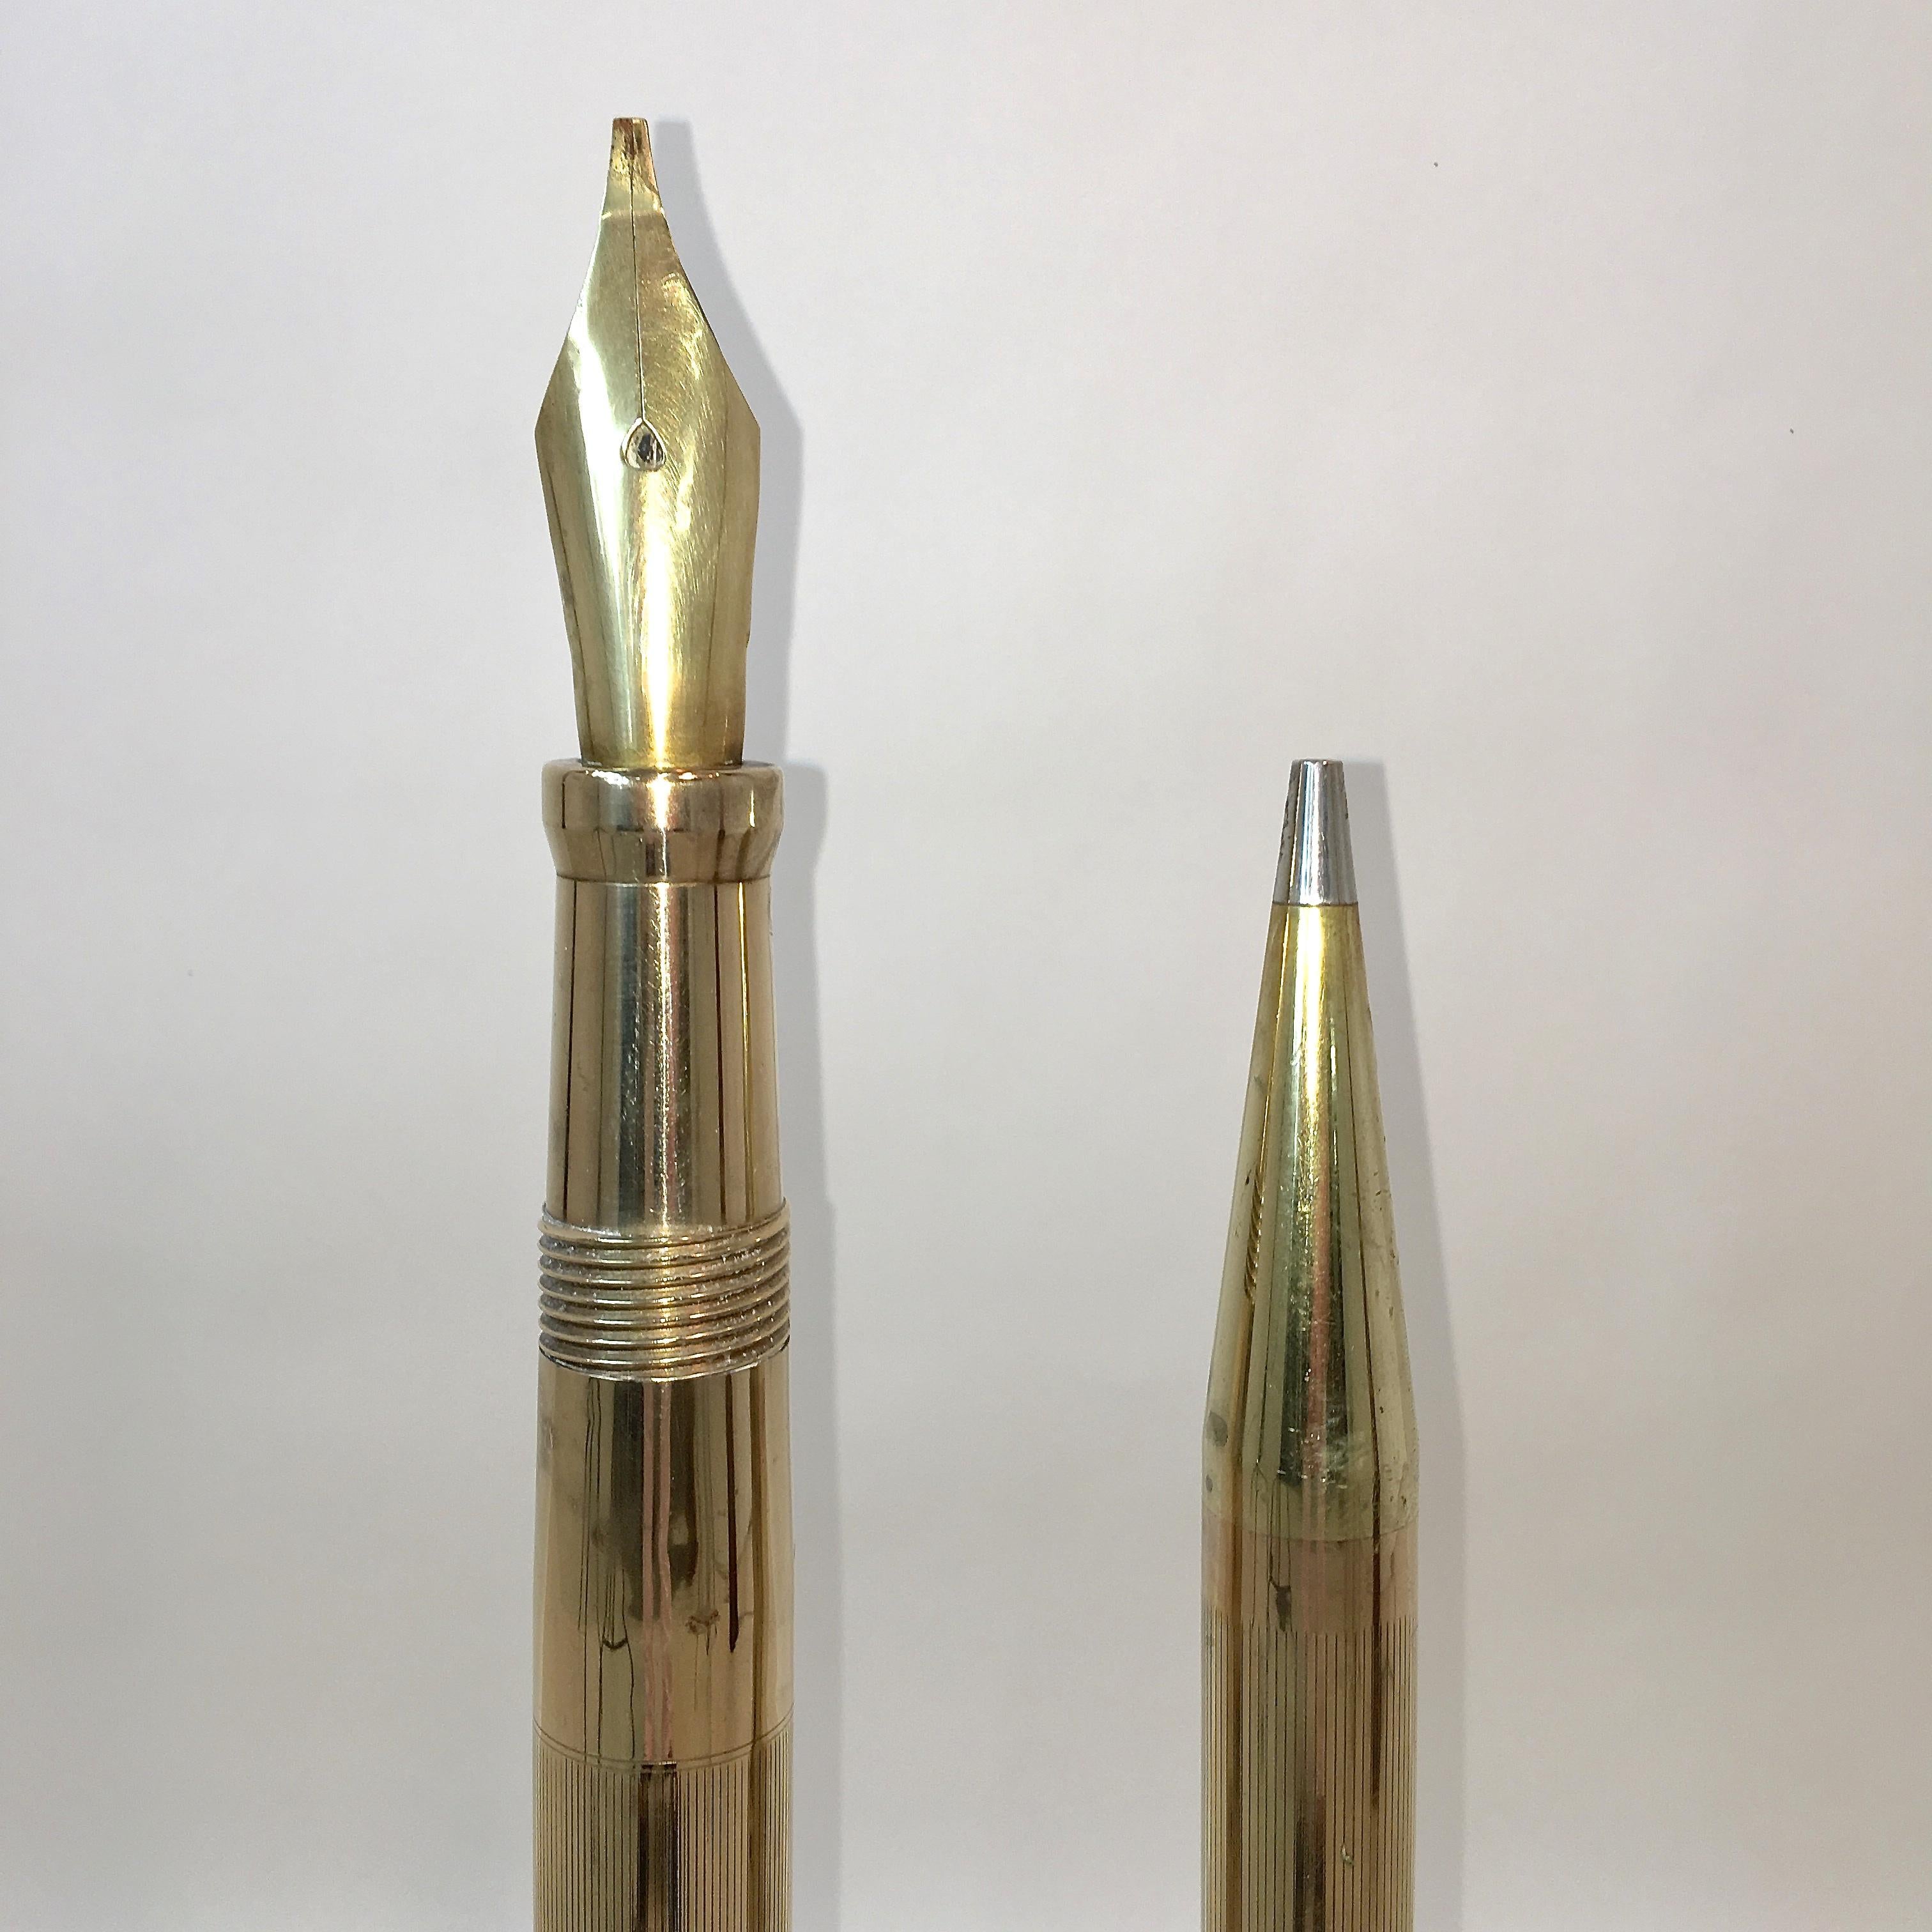 Giant Art Deco Brass Fountain Pen and Mechanical Pencil Display Models In Good Condition For Sale In Hanover, MA